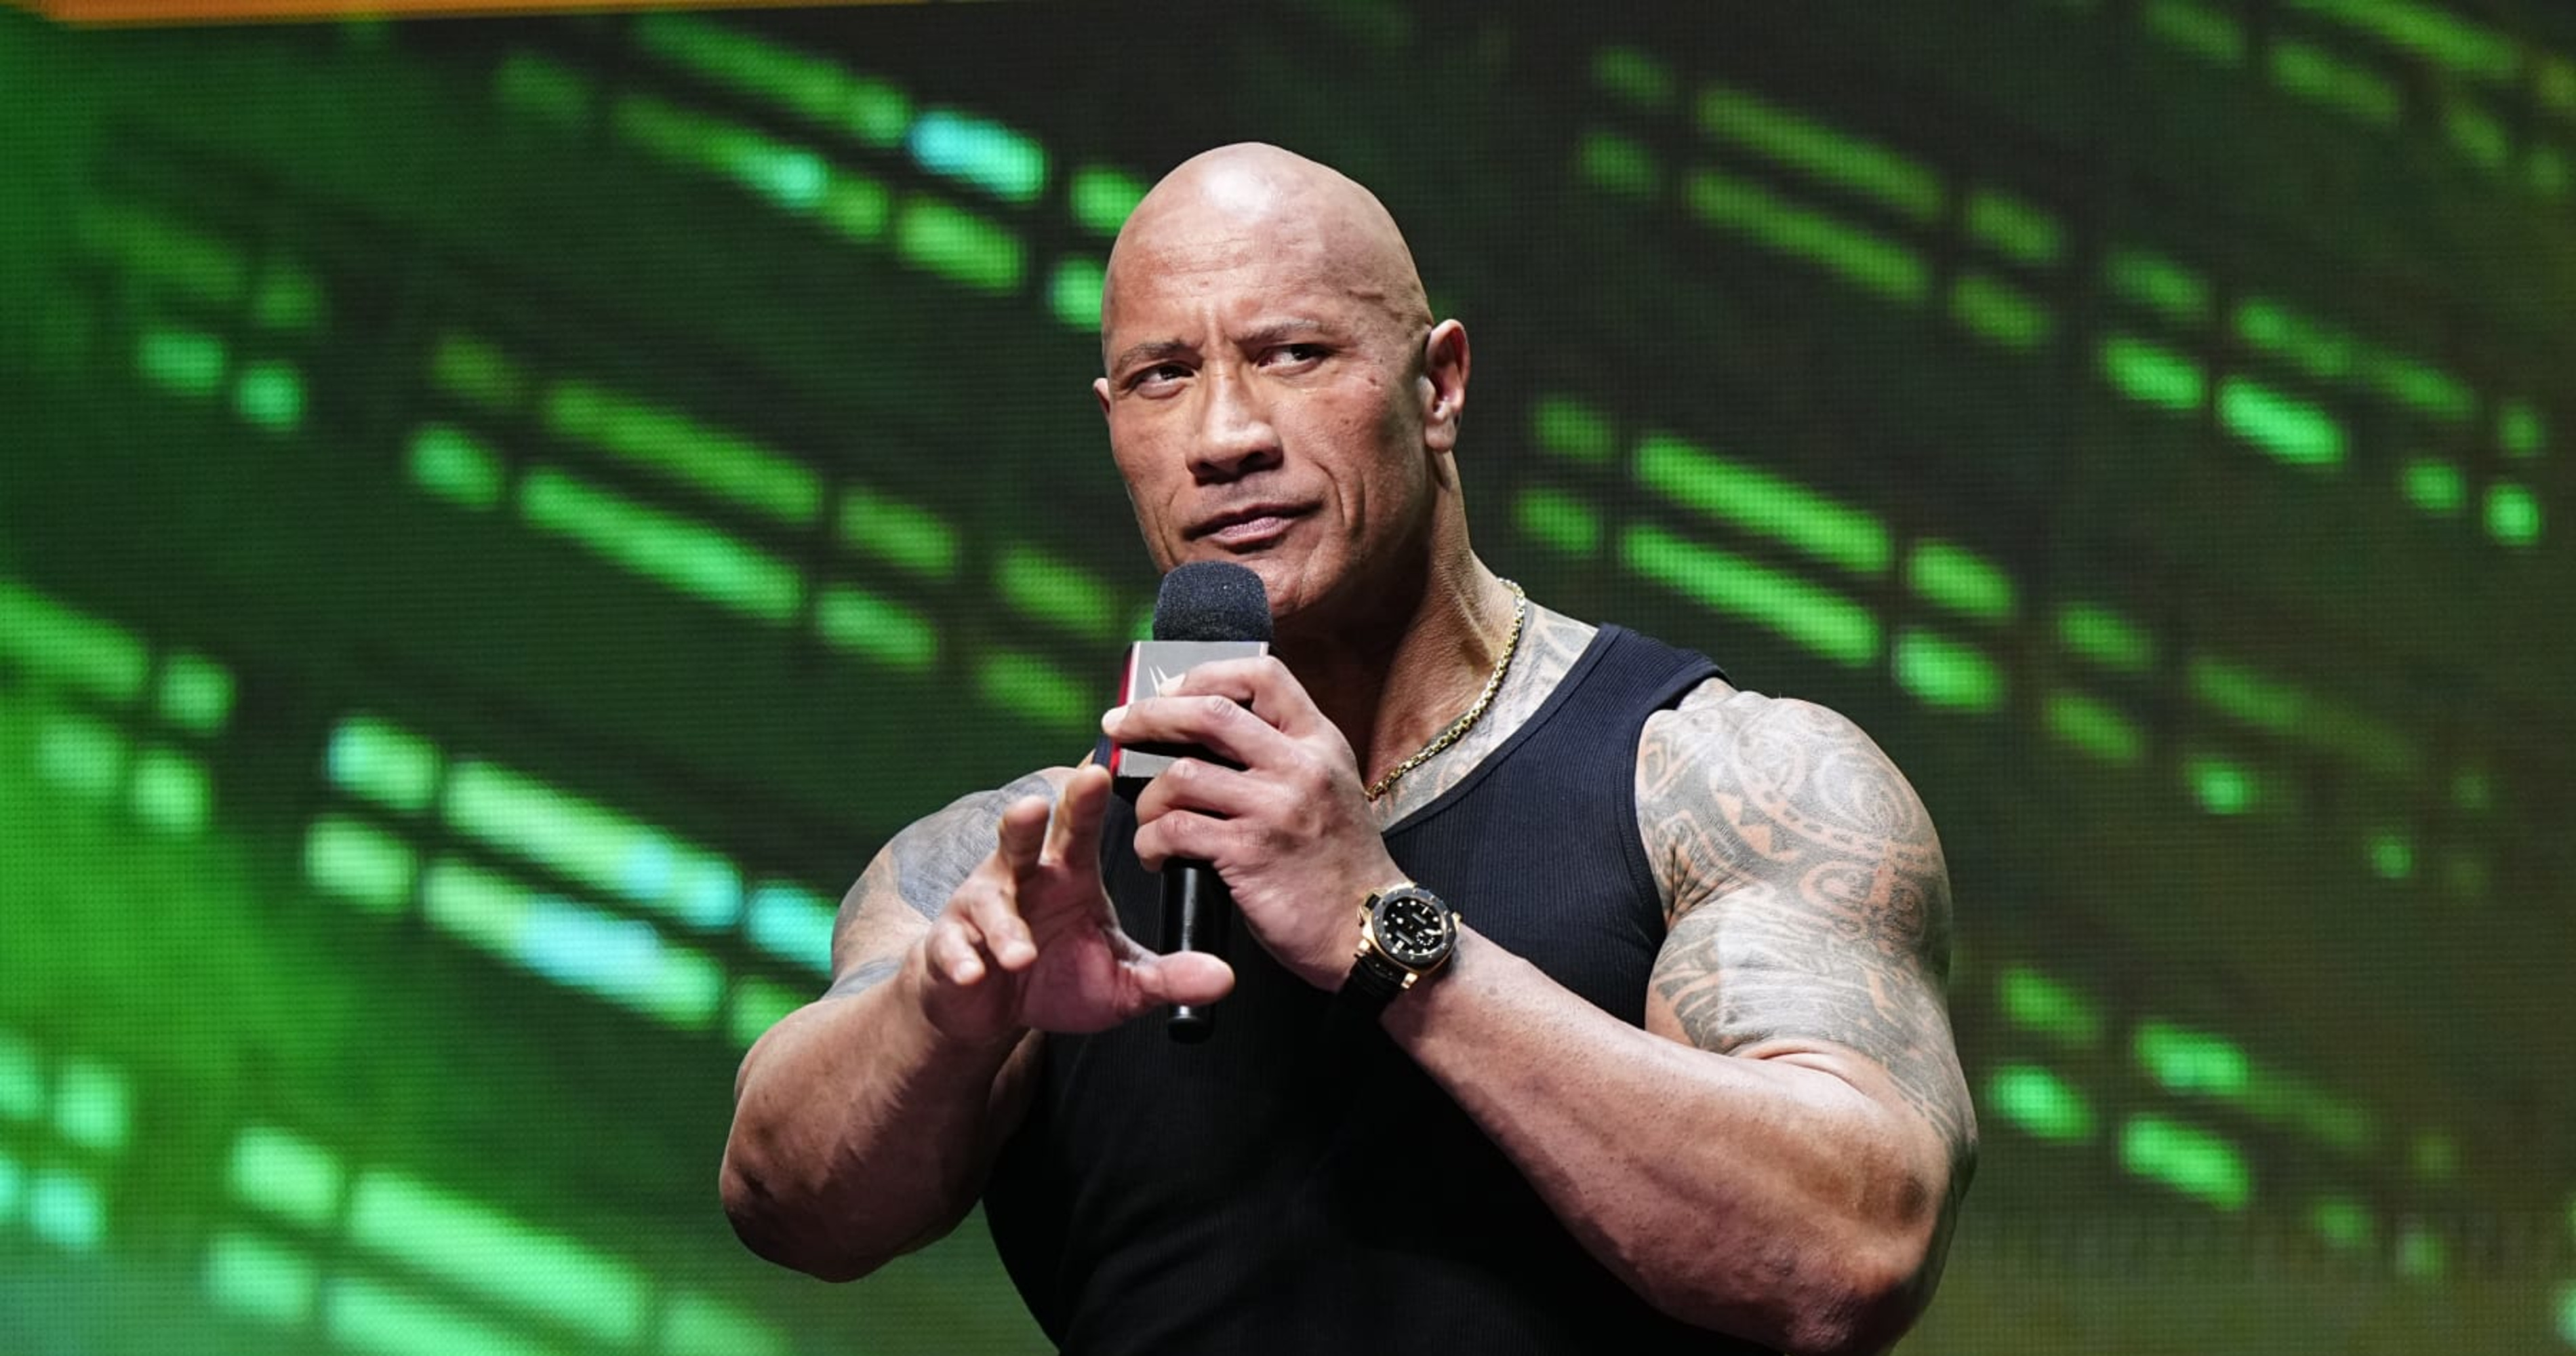 Video: The Rock Calls Out Cody Rhodes, Rollins in Song Ahead of WWE WrestleMania 40